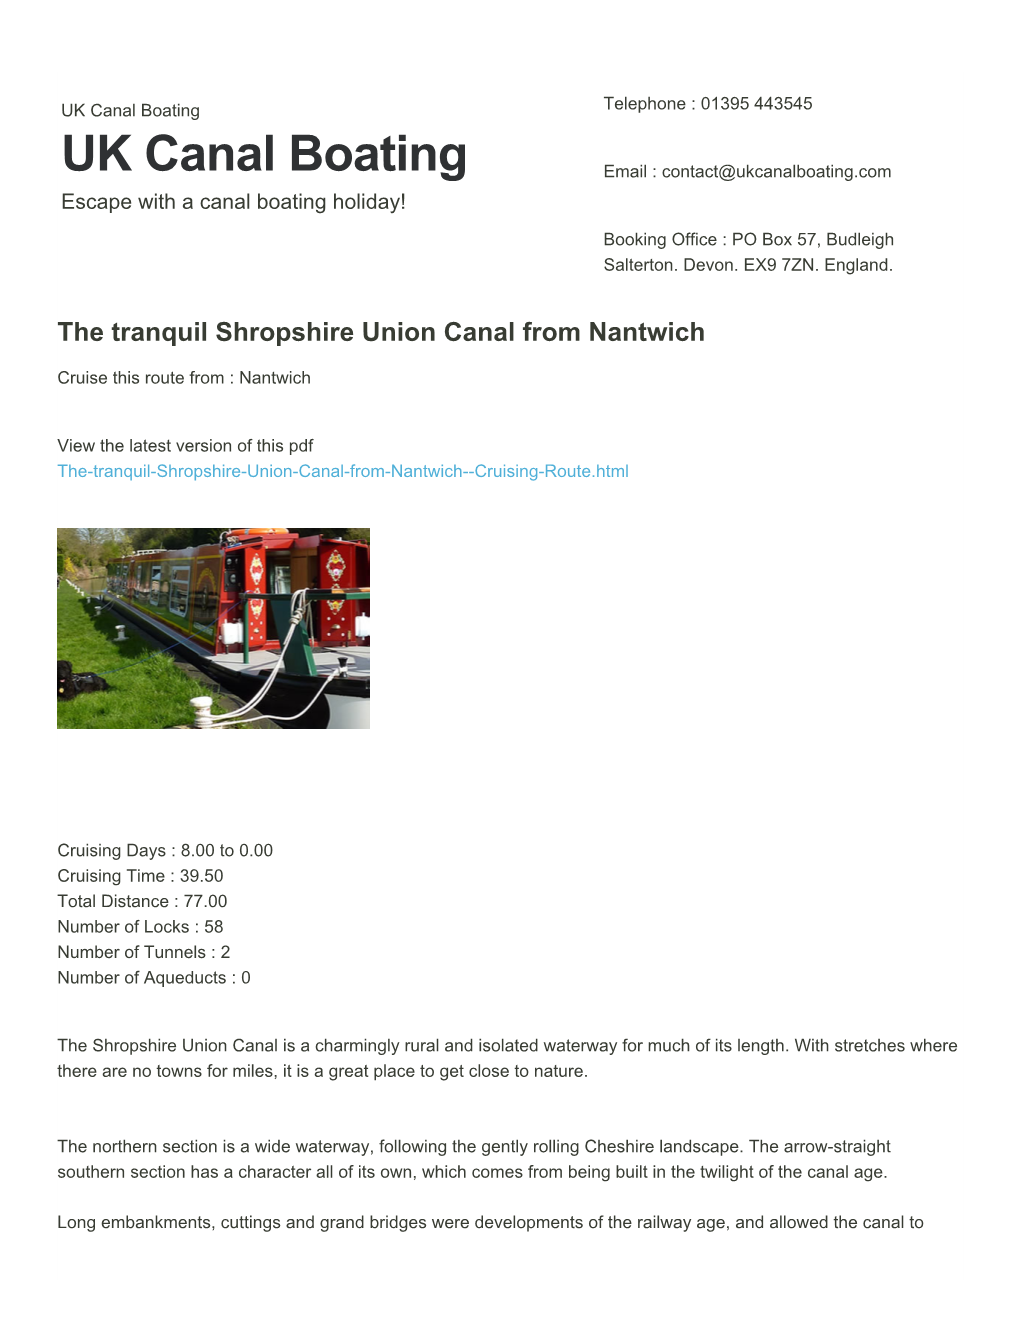 The Tranquil Shropshire Union Canal from Nantwich | UK Canal Boating